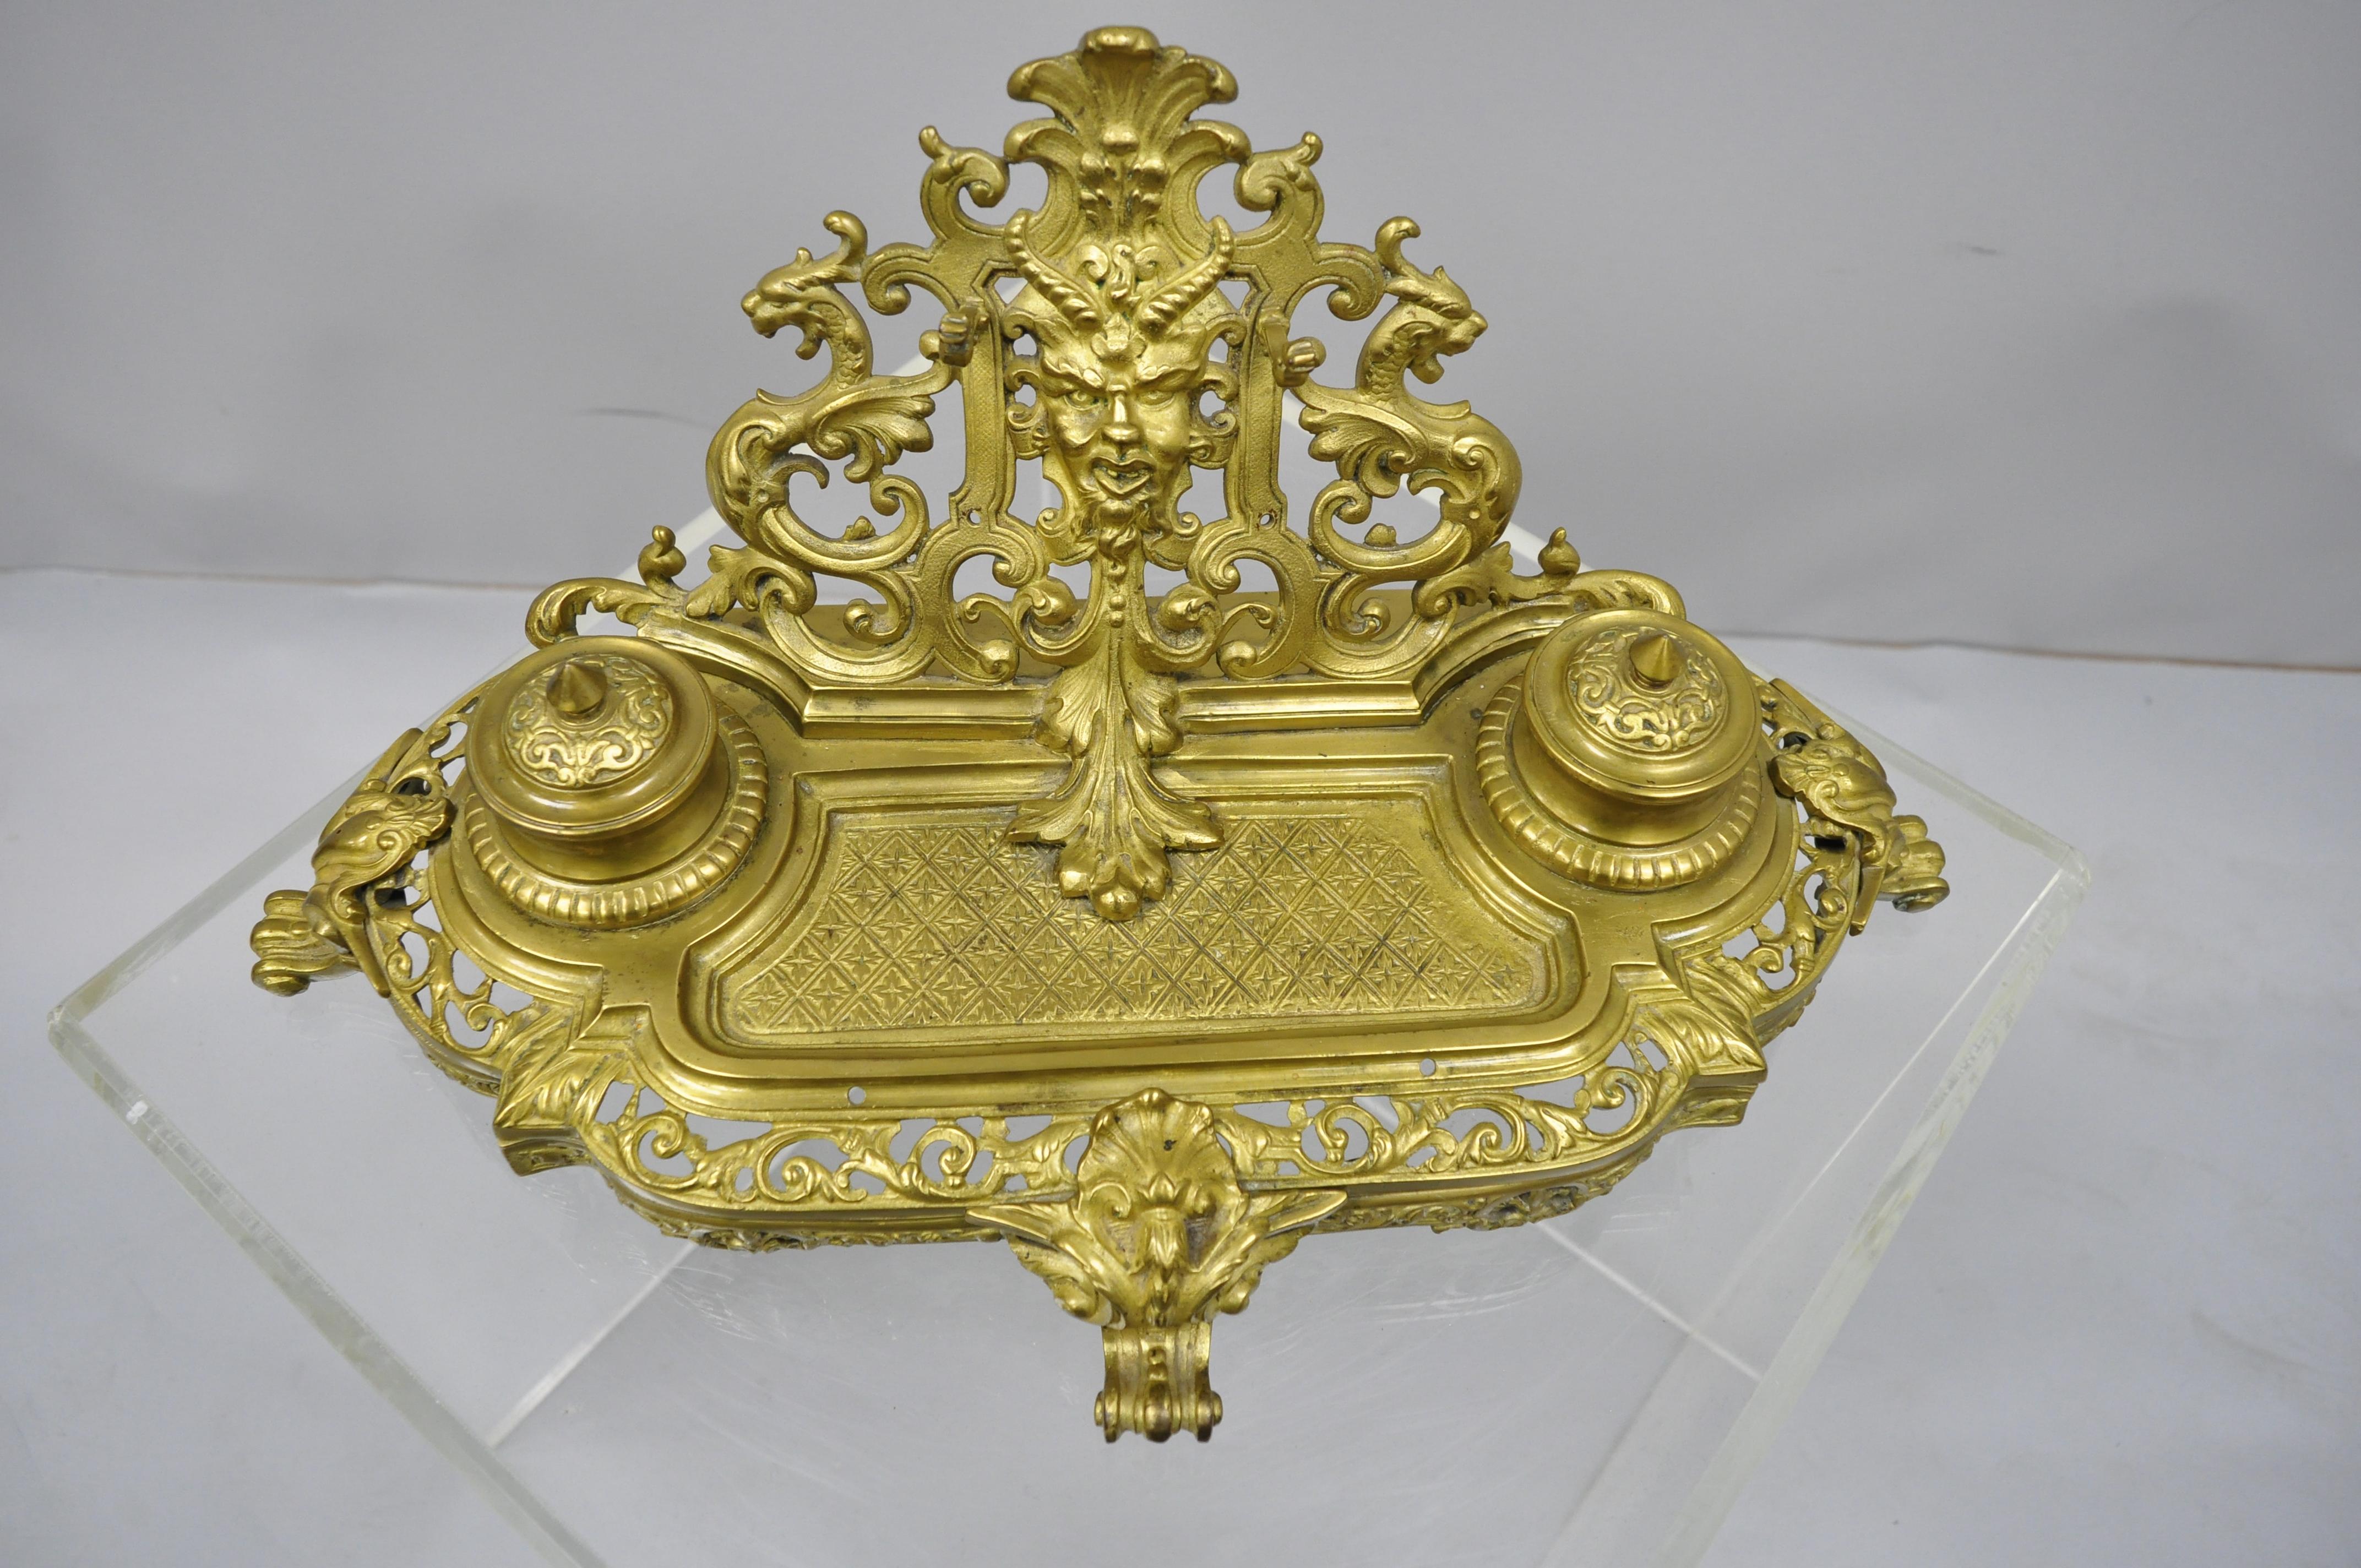 19th century, French Louis XV style figural cast bronze double inkwell pen holder. Item features cast bronze lions and central face, double inkwell with glass inserts, pen holder, and other ornate pierced bronze detail. circa 19th century.